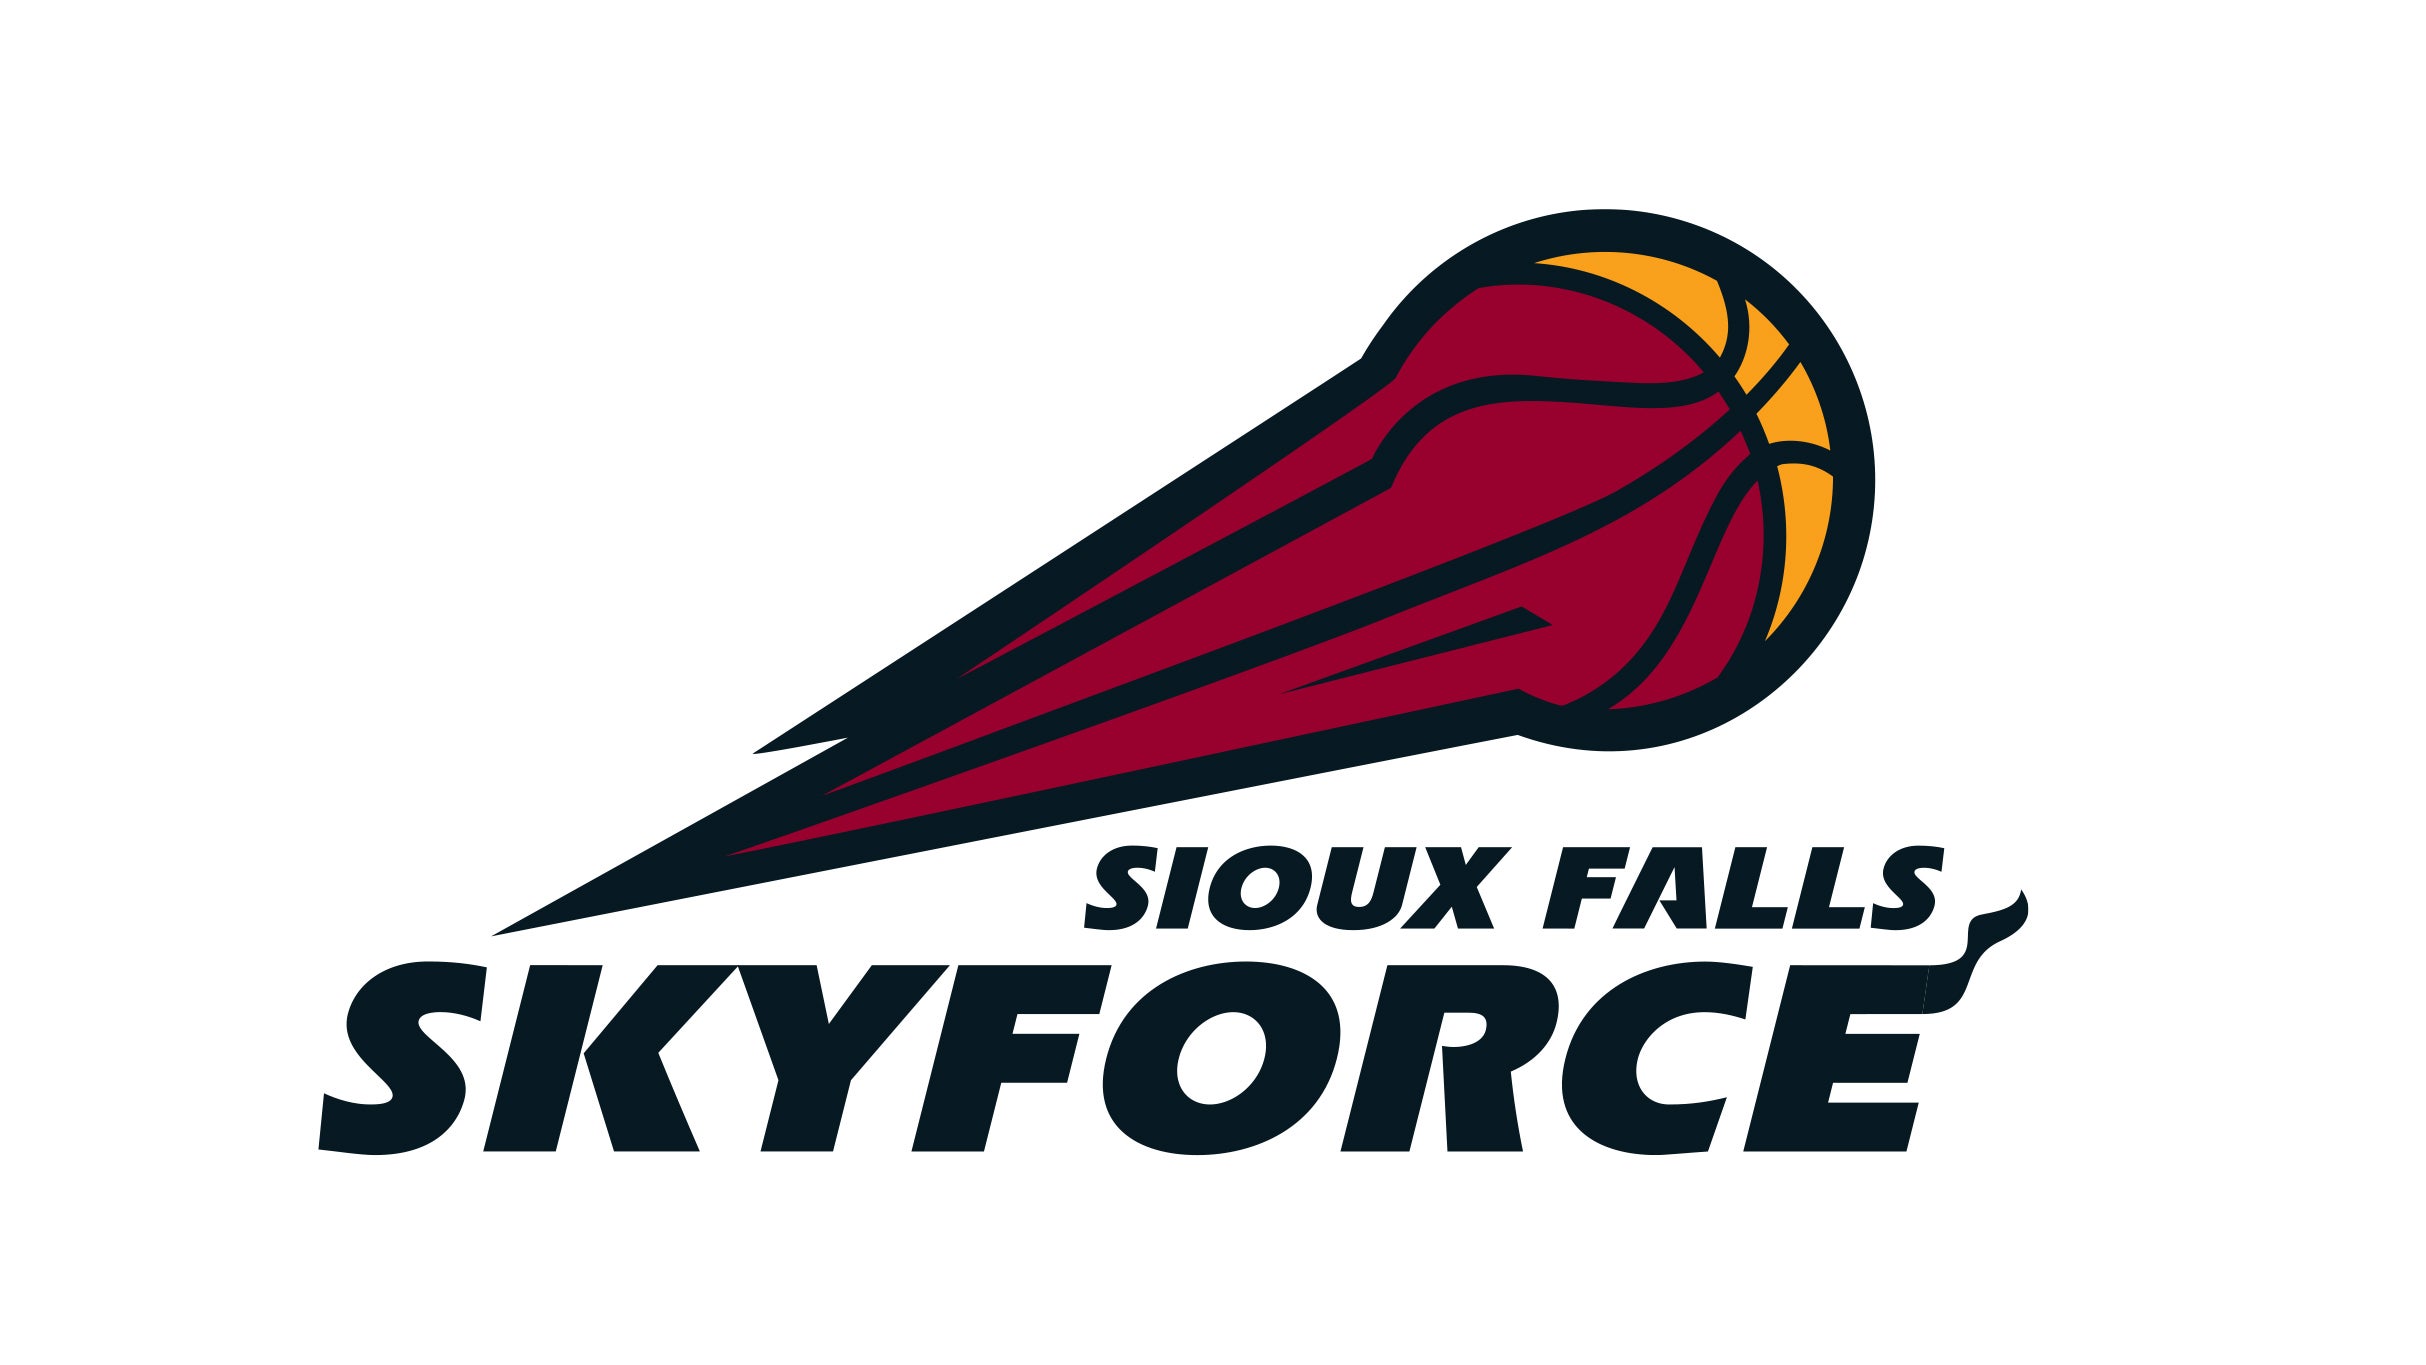 Sioux Falls Skyforce vs. Cleveland Charge - Sioux Falls, SD 57107